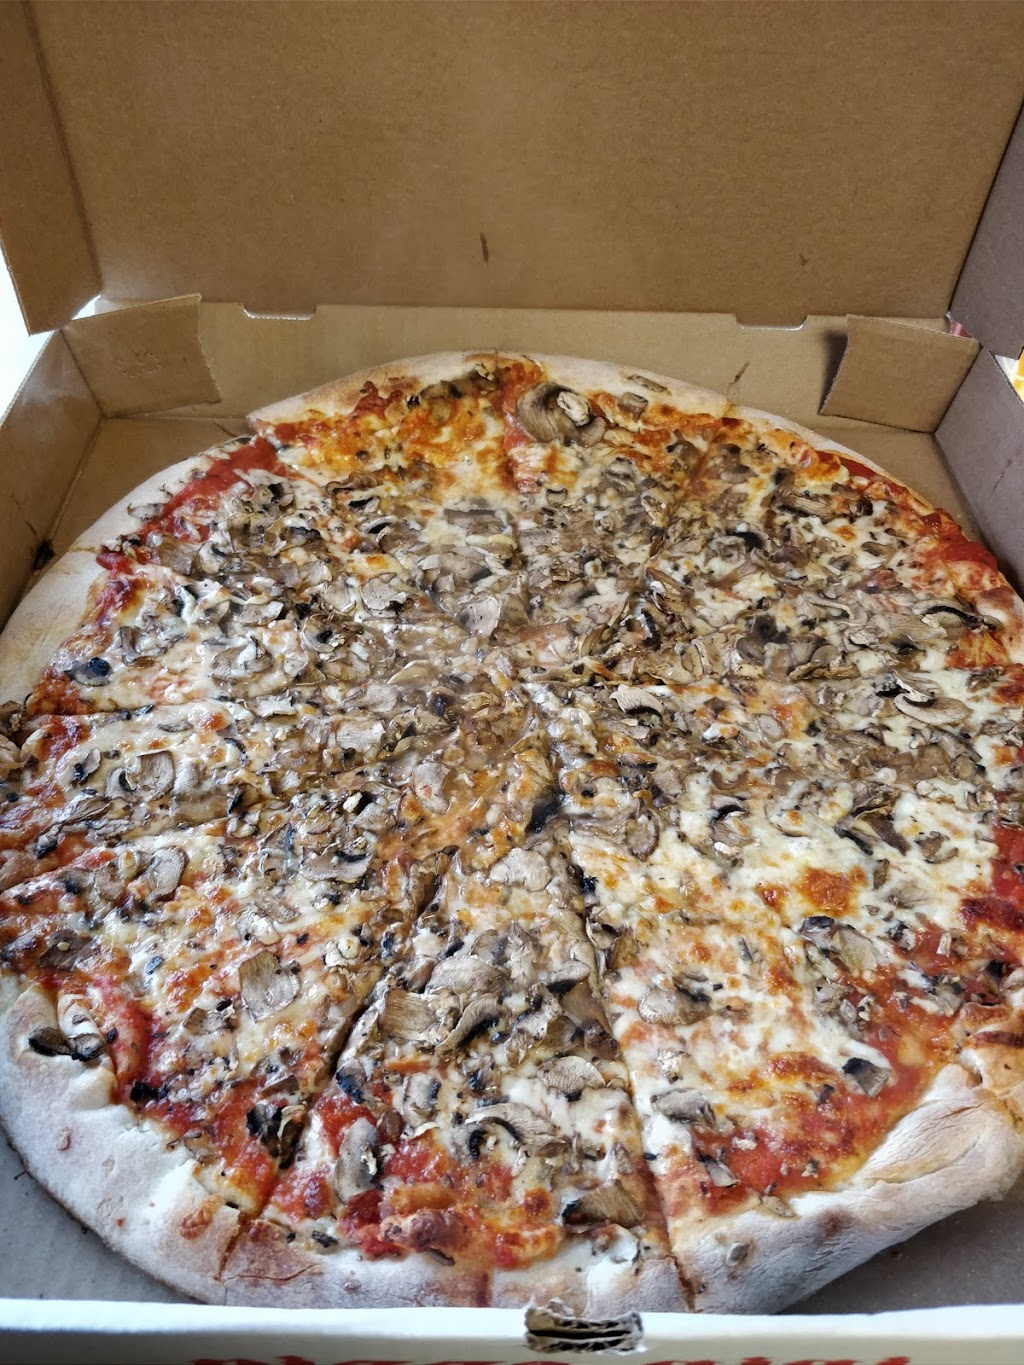 Pizza Gigi | meal delivery | 189 Harbord St, Toronto, ON M5S 1H5, Canada | 4165354444 OR +1 416-535-4444